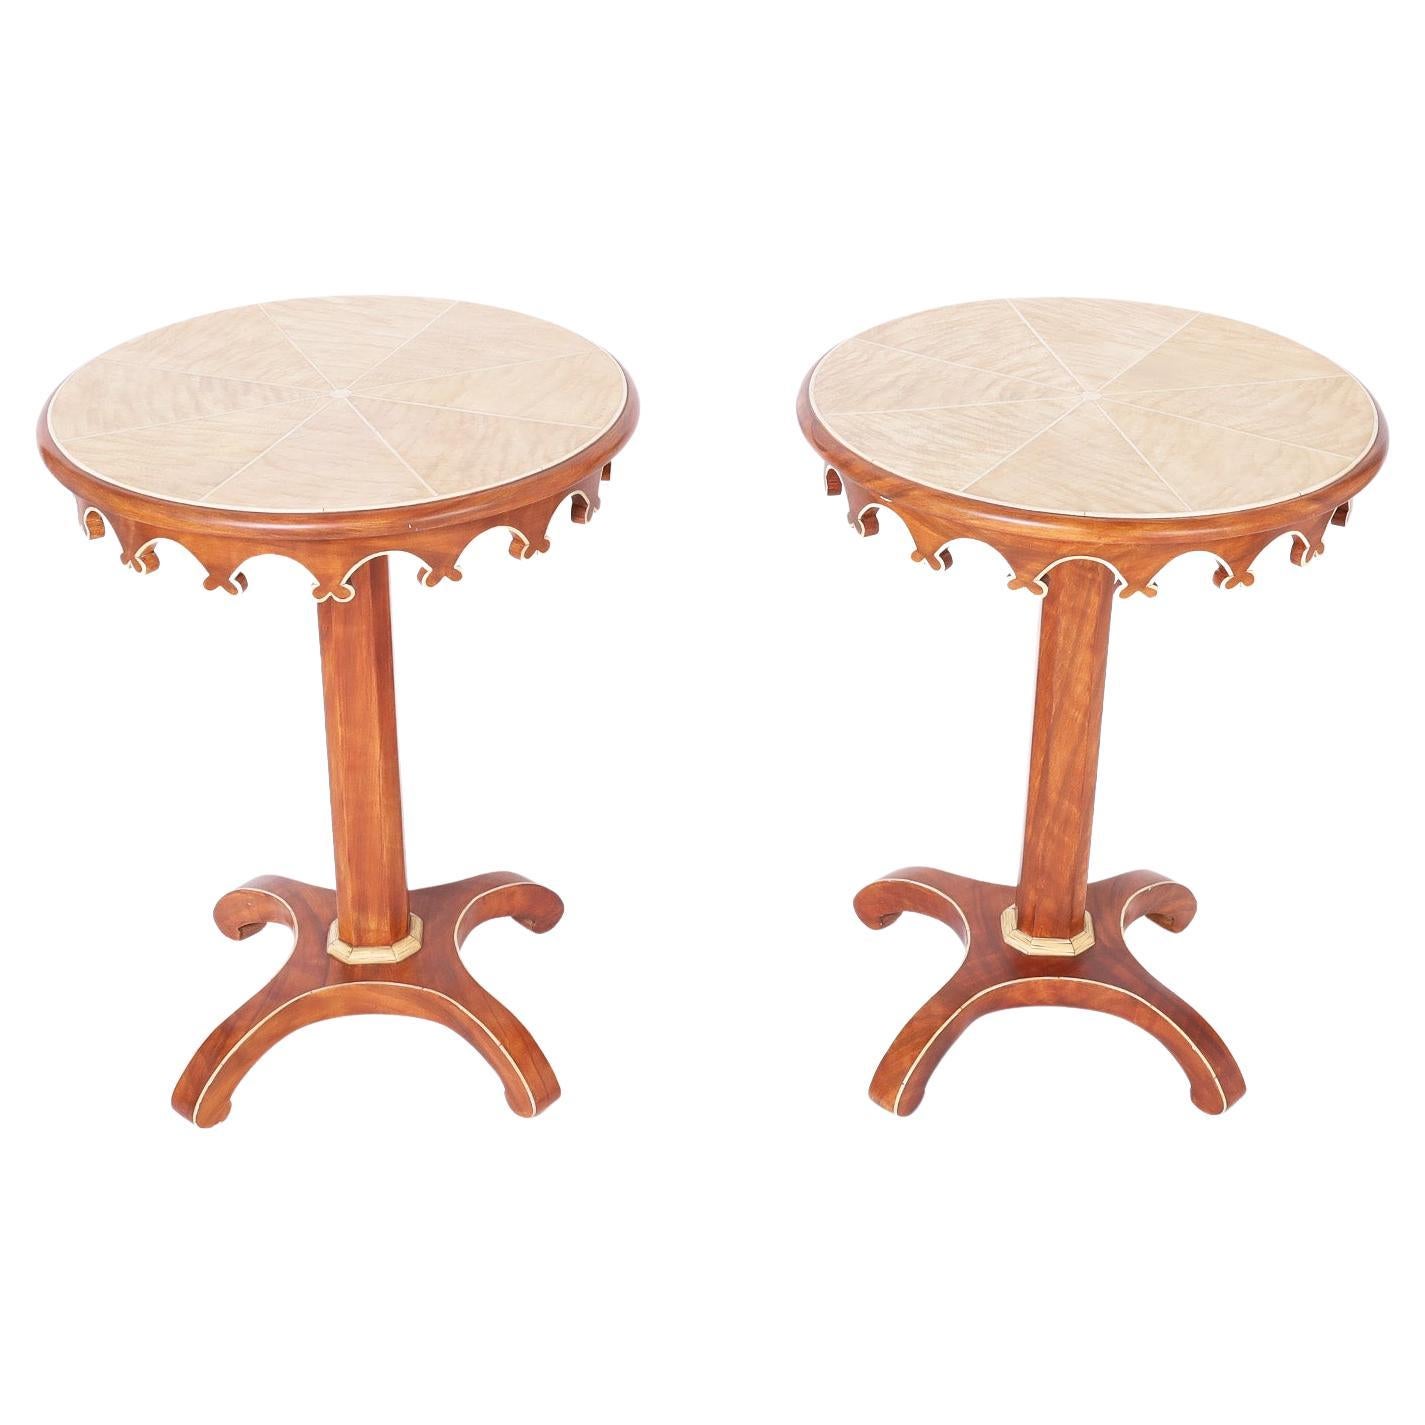 Pair of stylized neoclassic mid-century stands or tables crafted in hardwoods with a mahogany finish having round grain painted tops with scalloped skirts over a pedestal on a four legged base all outlined and highlighted with blonde wood.